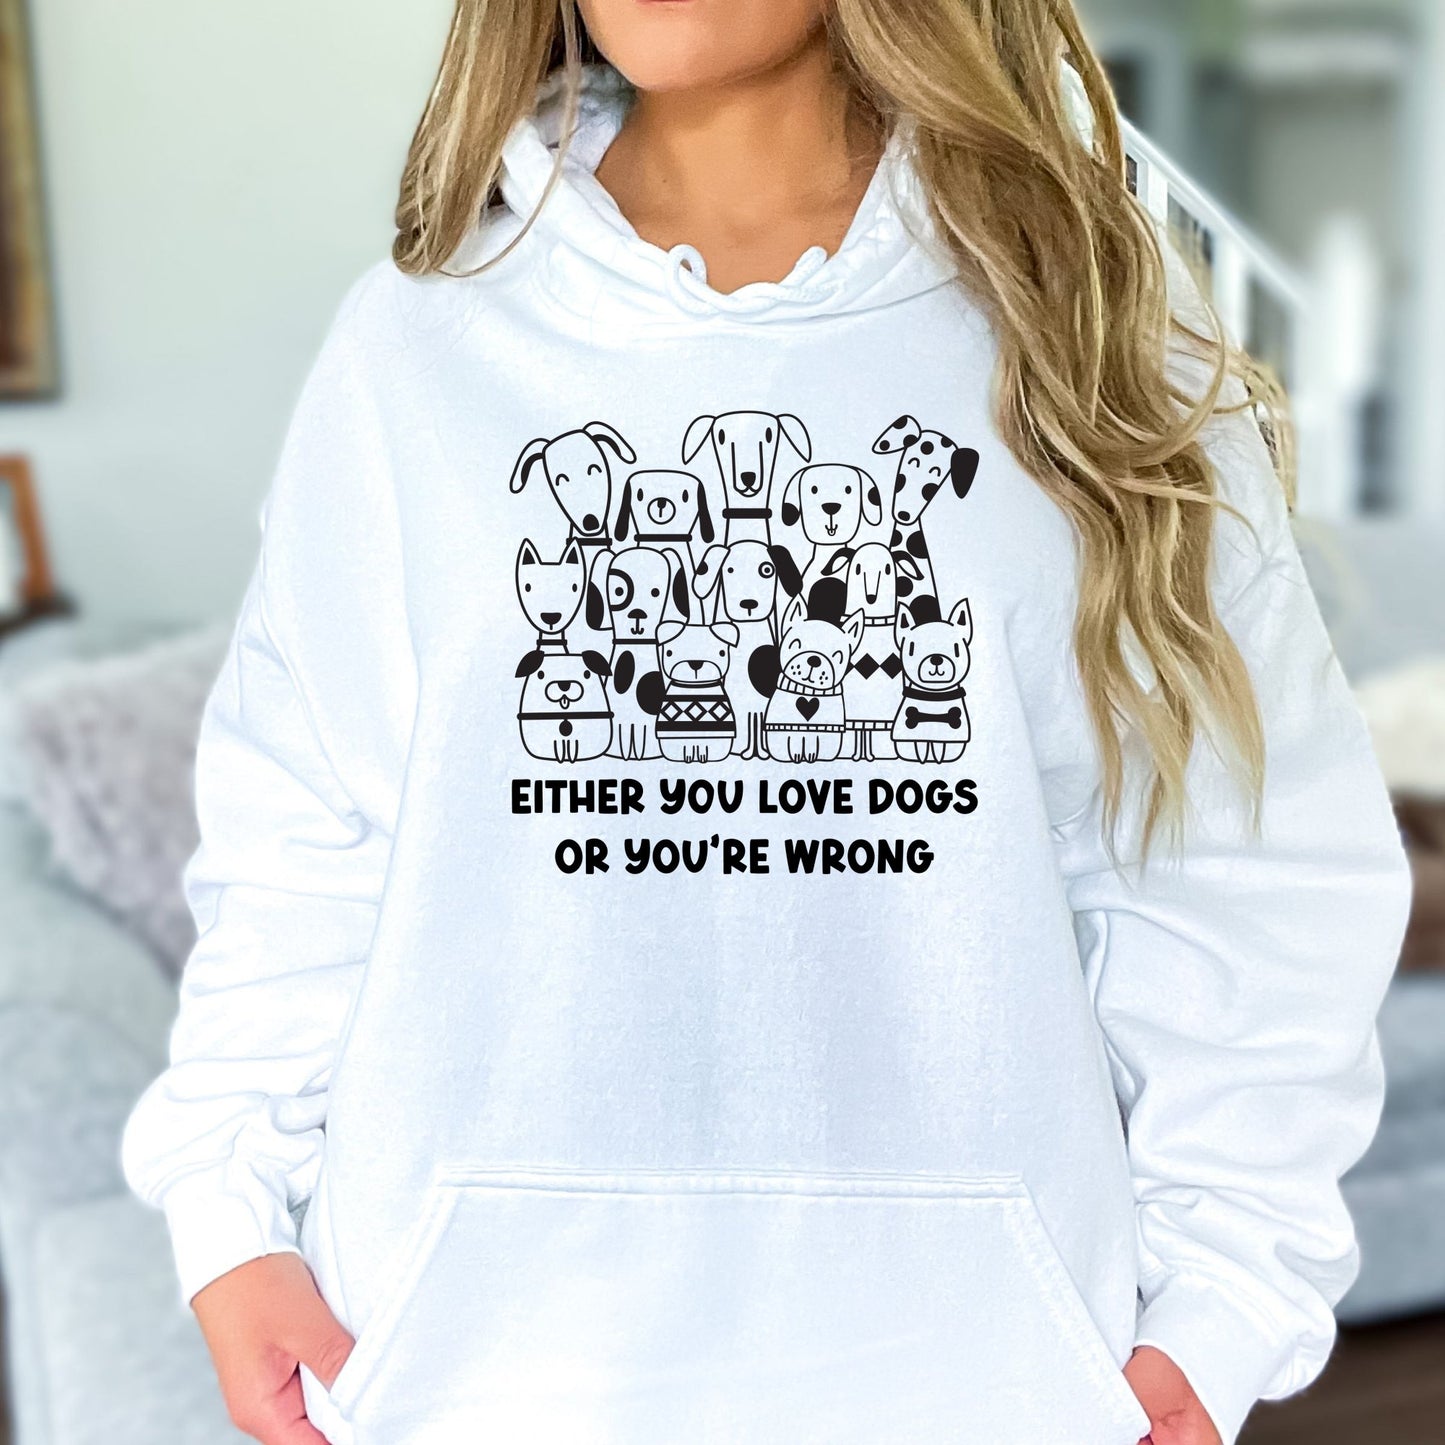 Either You Love Dogs or You're Wrong Hooded Sweatshirt - PuppyJo Sweatshirt S / White